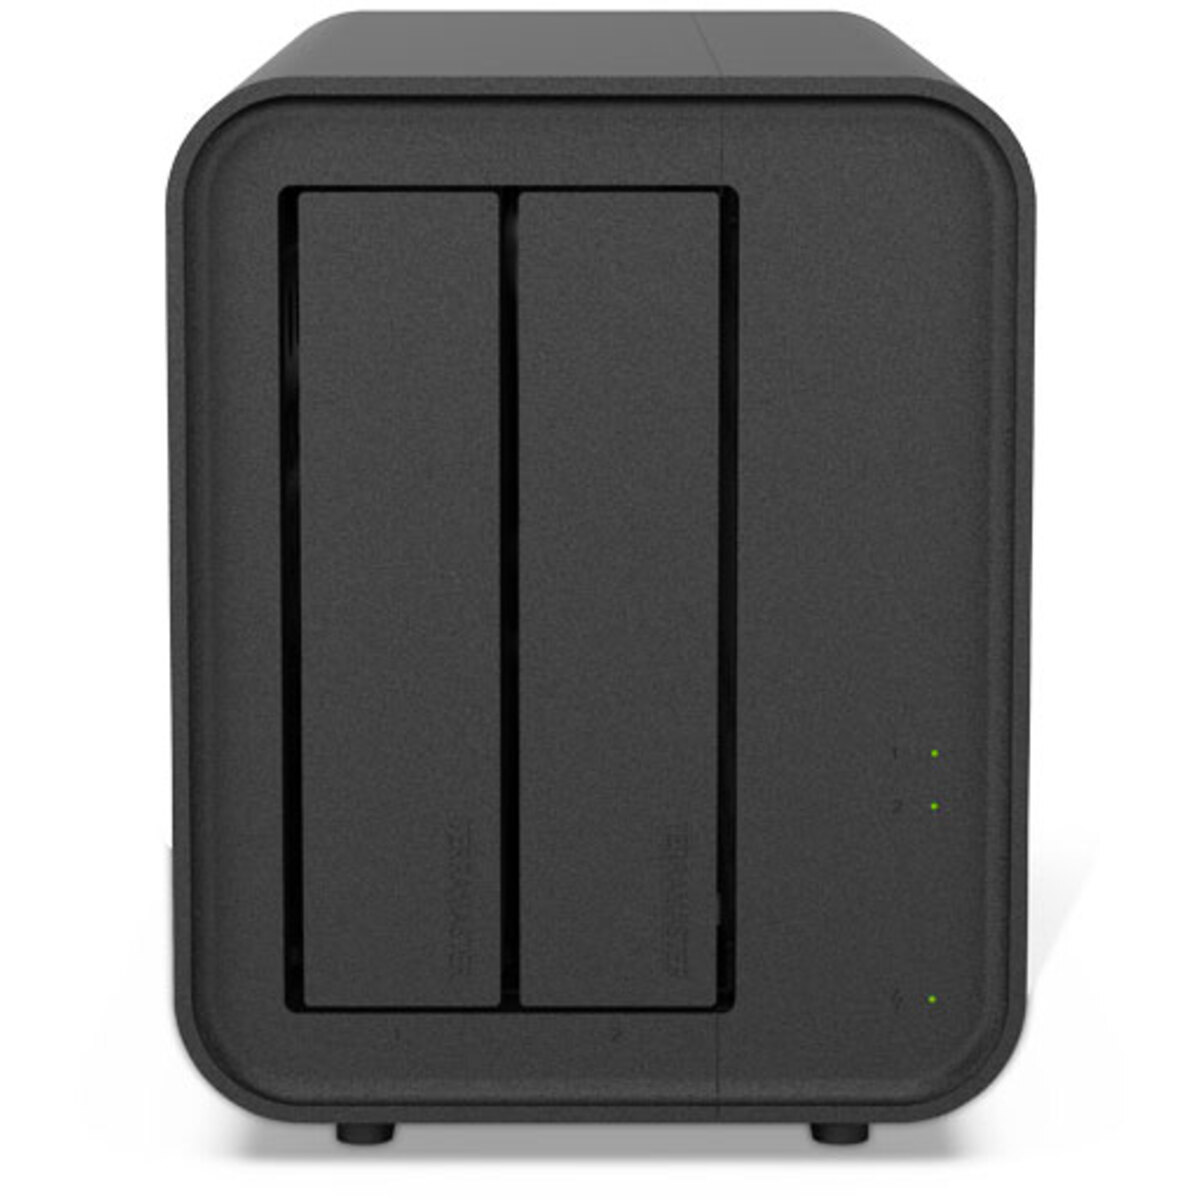 TerraMaster F2-424 8tb 2-Bay Desktop Multimedia / Power User / Business NAS - Network Attached Storage Device 1x8tb Seagate IronWolf Pro ST8000NT001 3.5 7200rpm SATA 6Gb/s HDD NAS Class Drives Installed - Burn-In Tested - ON SALE F2-424